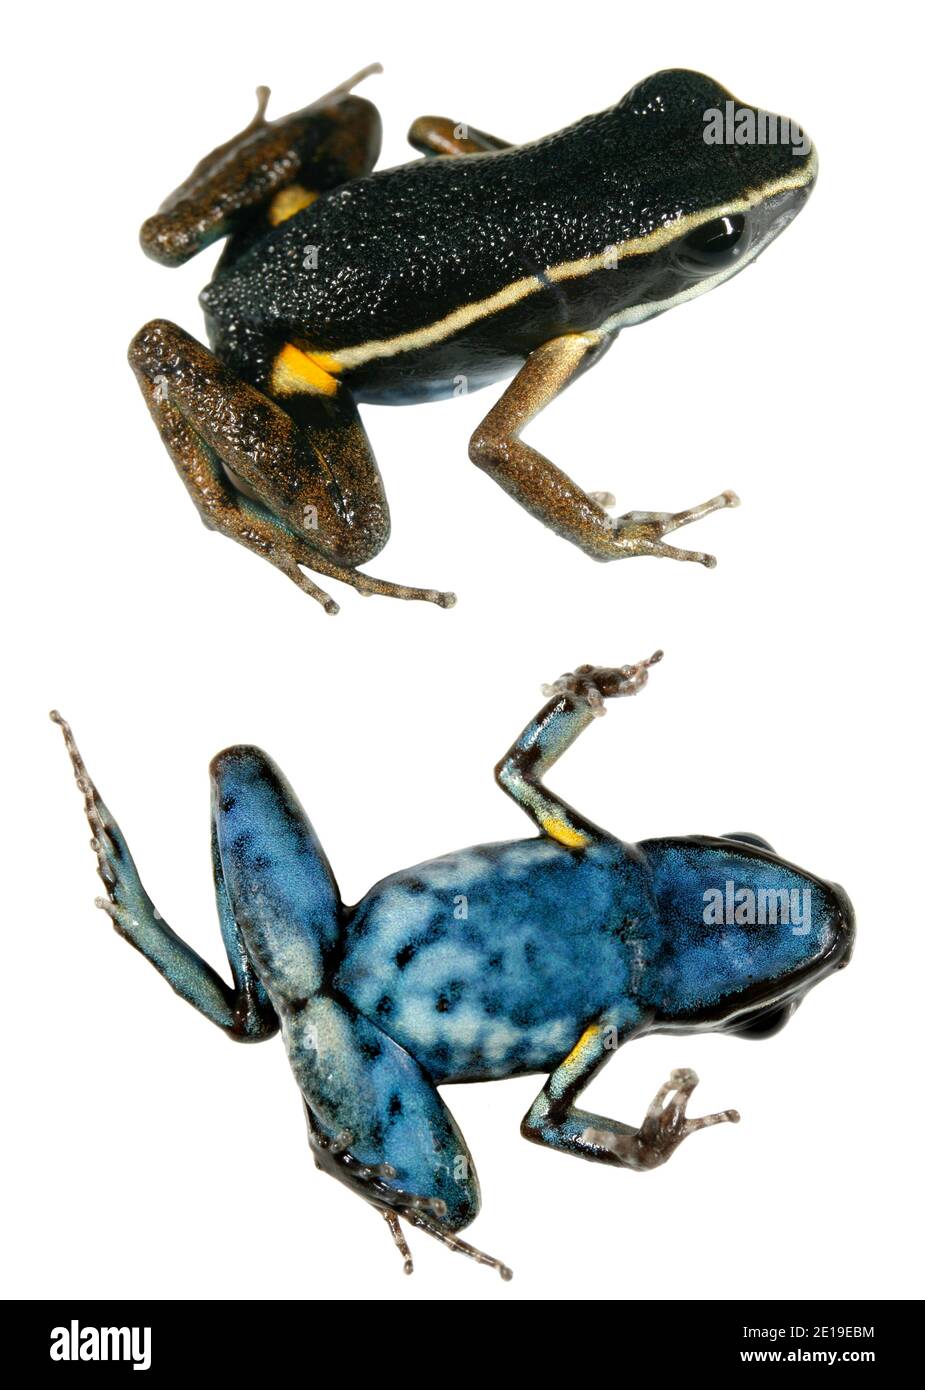 Spotted-legged poison frog (Ameerega hahneli), dorsal and ventral view. From the Peruvian Amazon Stock Photo